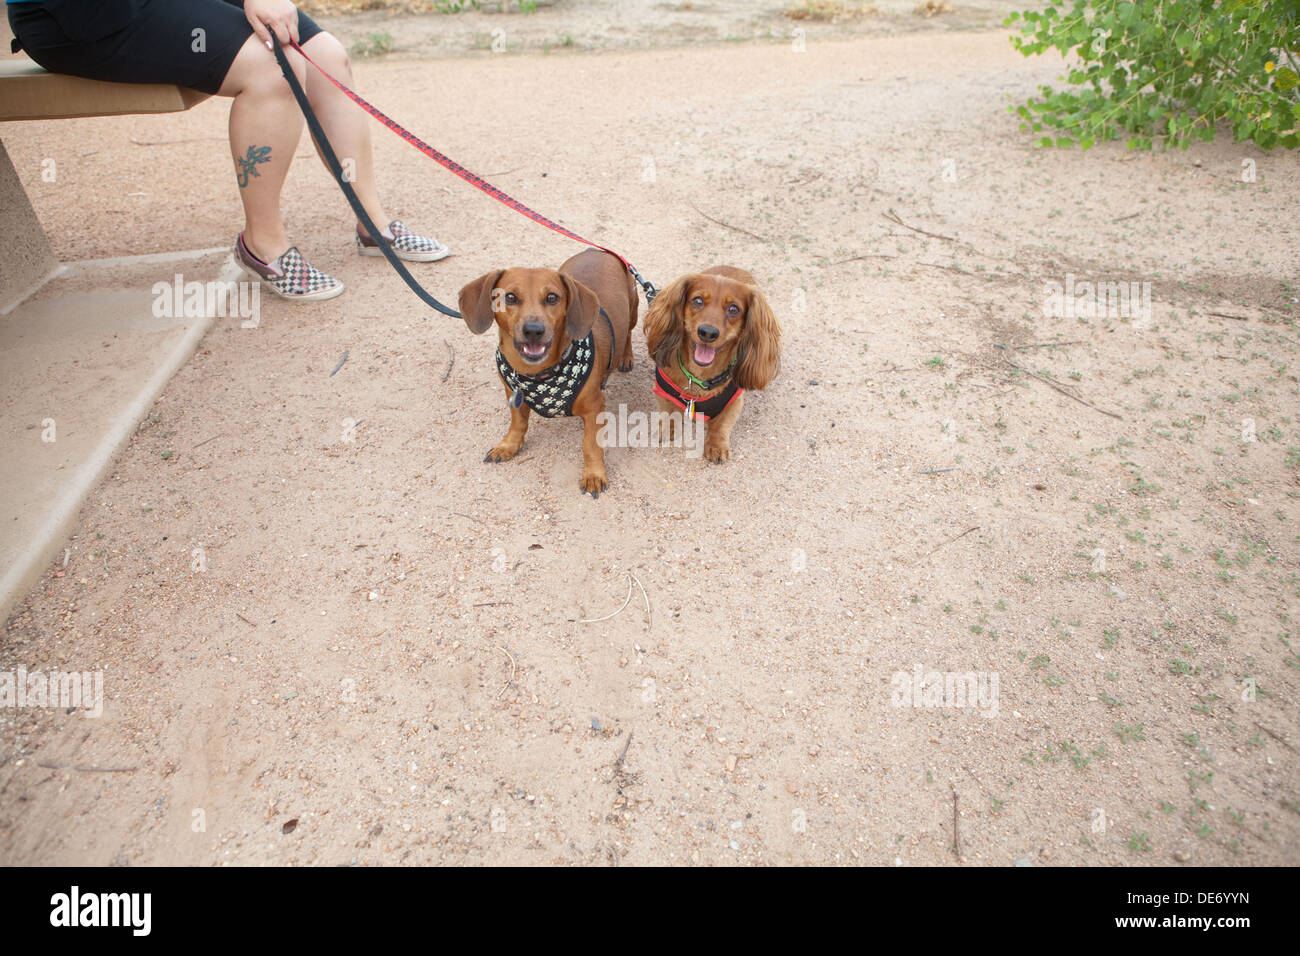 Two dachshunds on a leash. Stock Photo